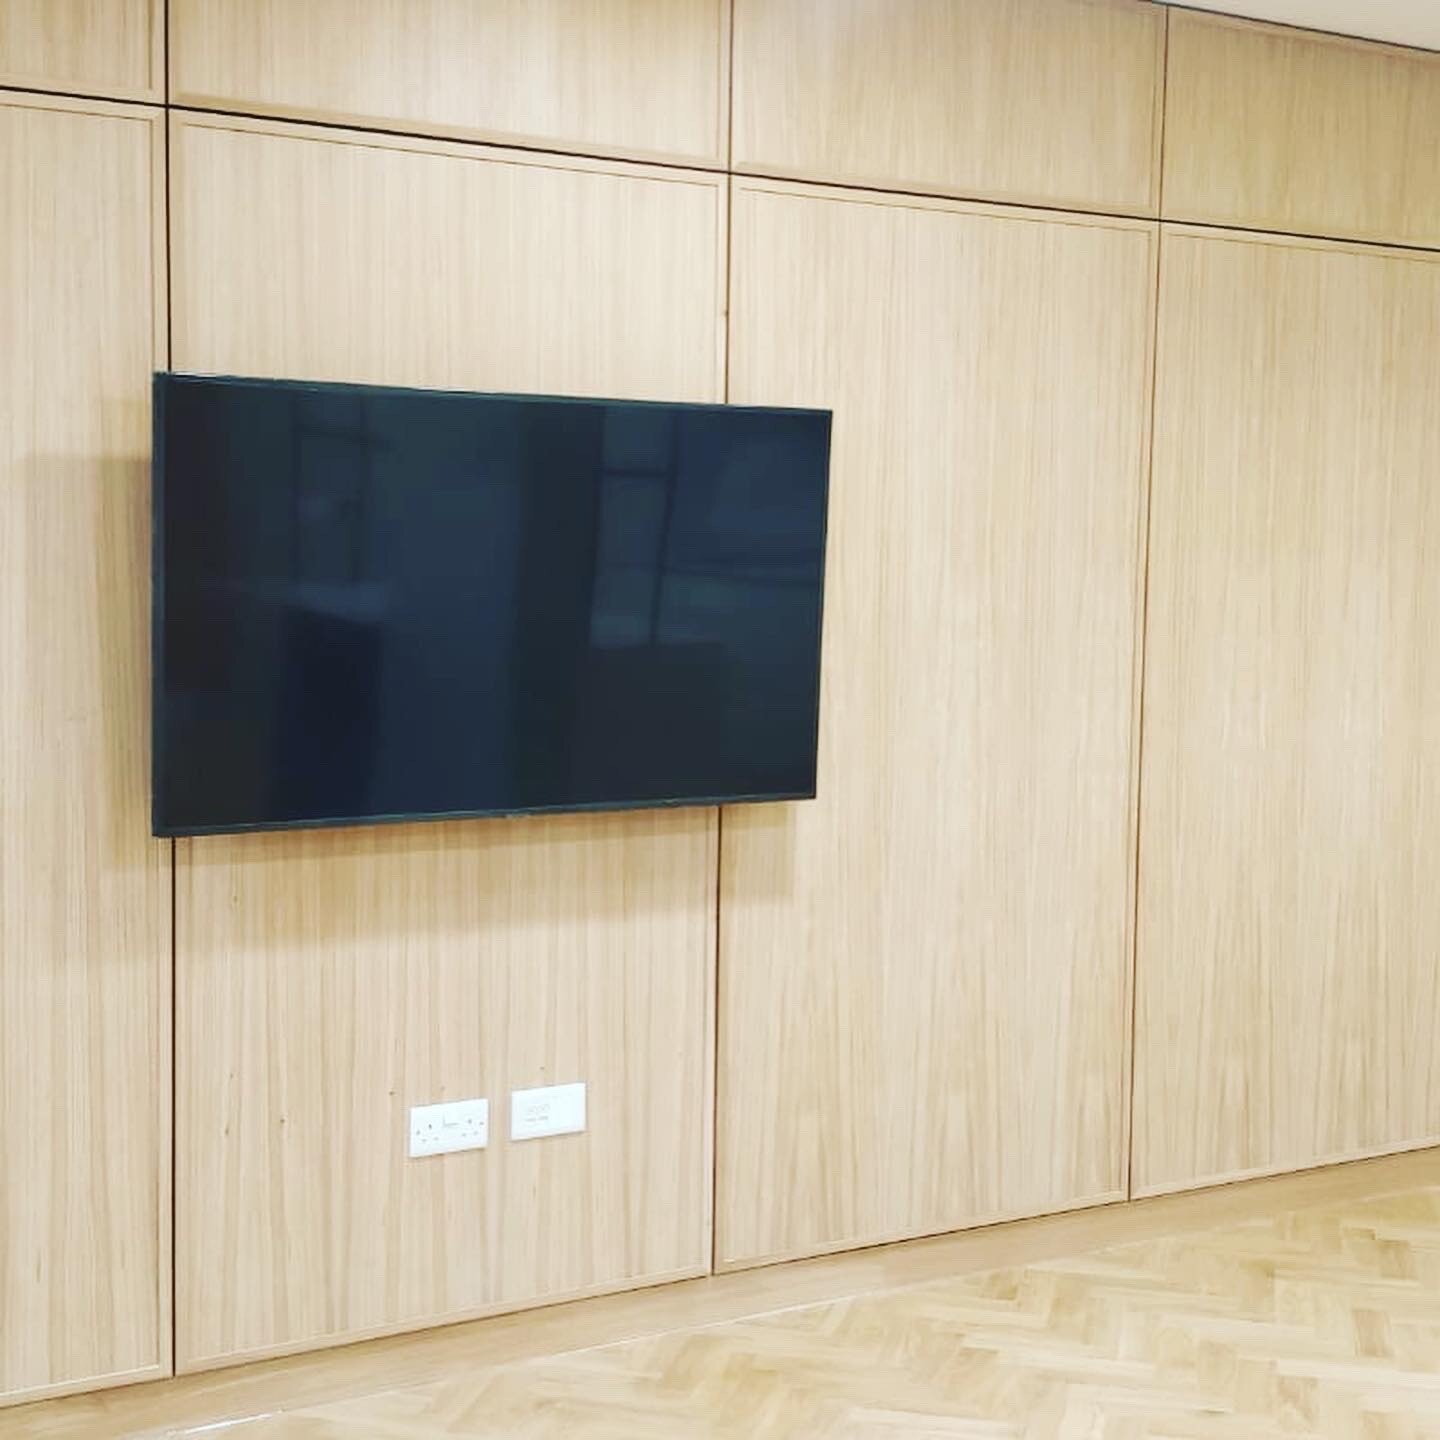 TV mounted to a wall